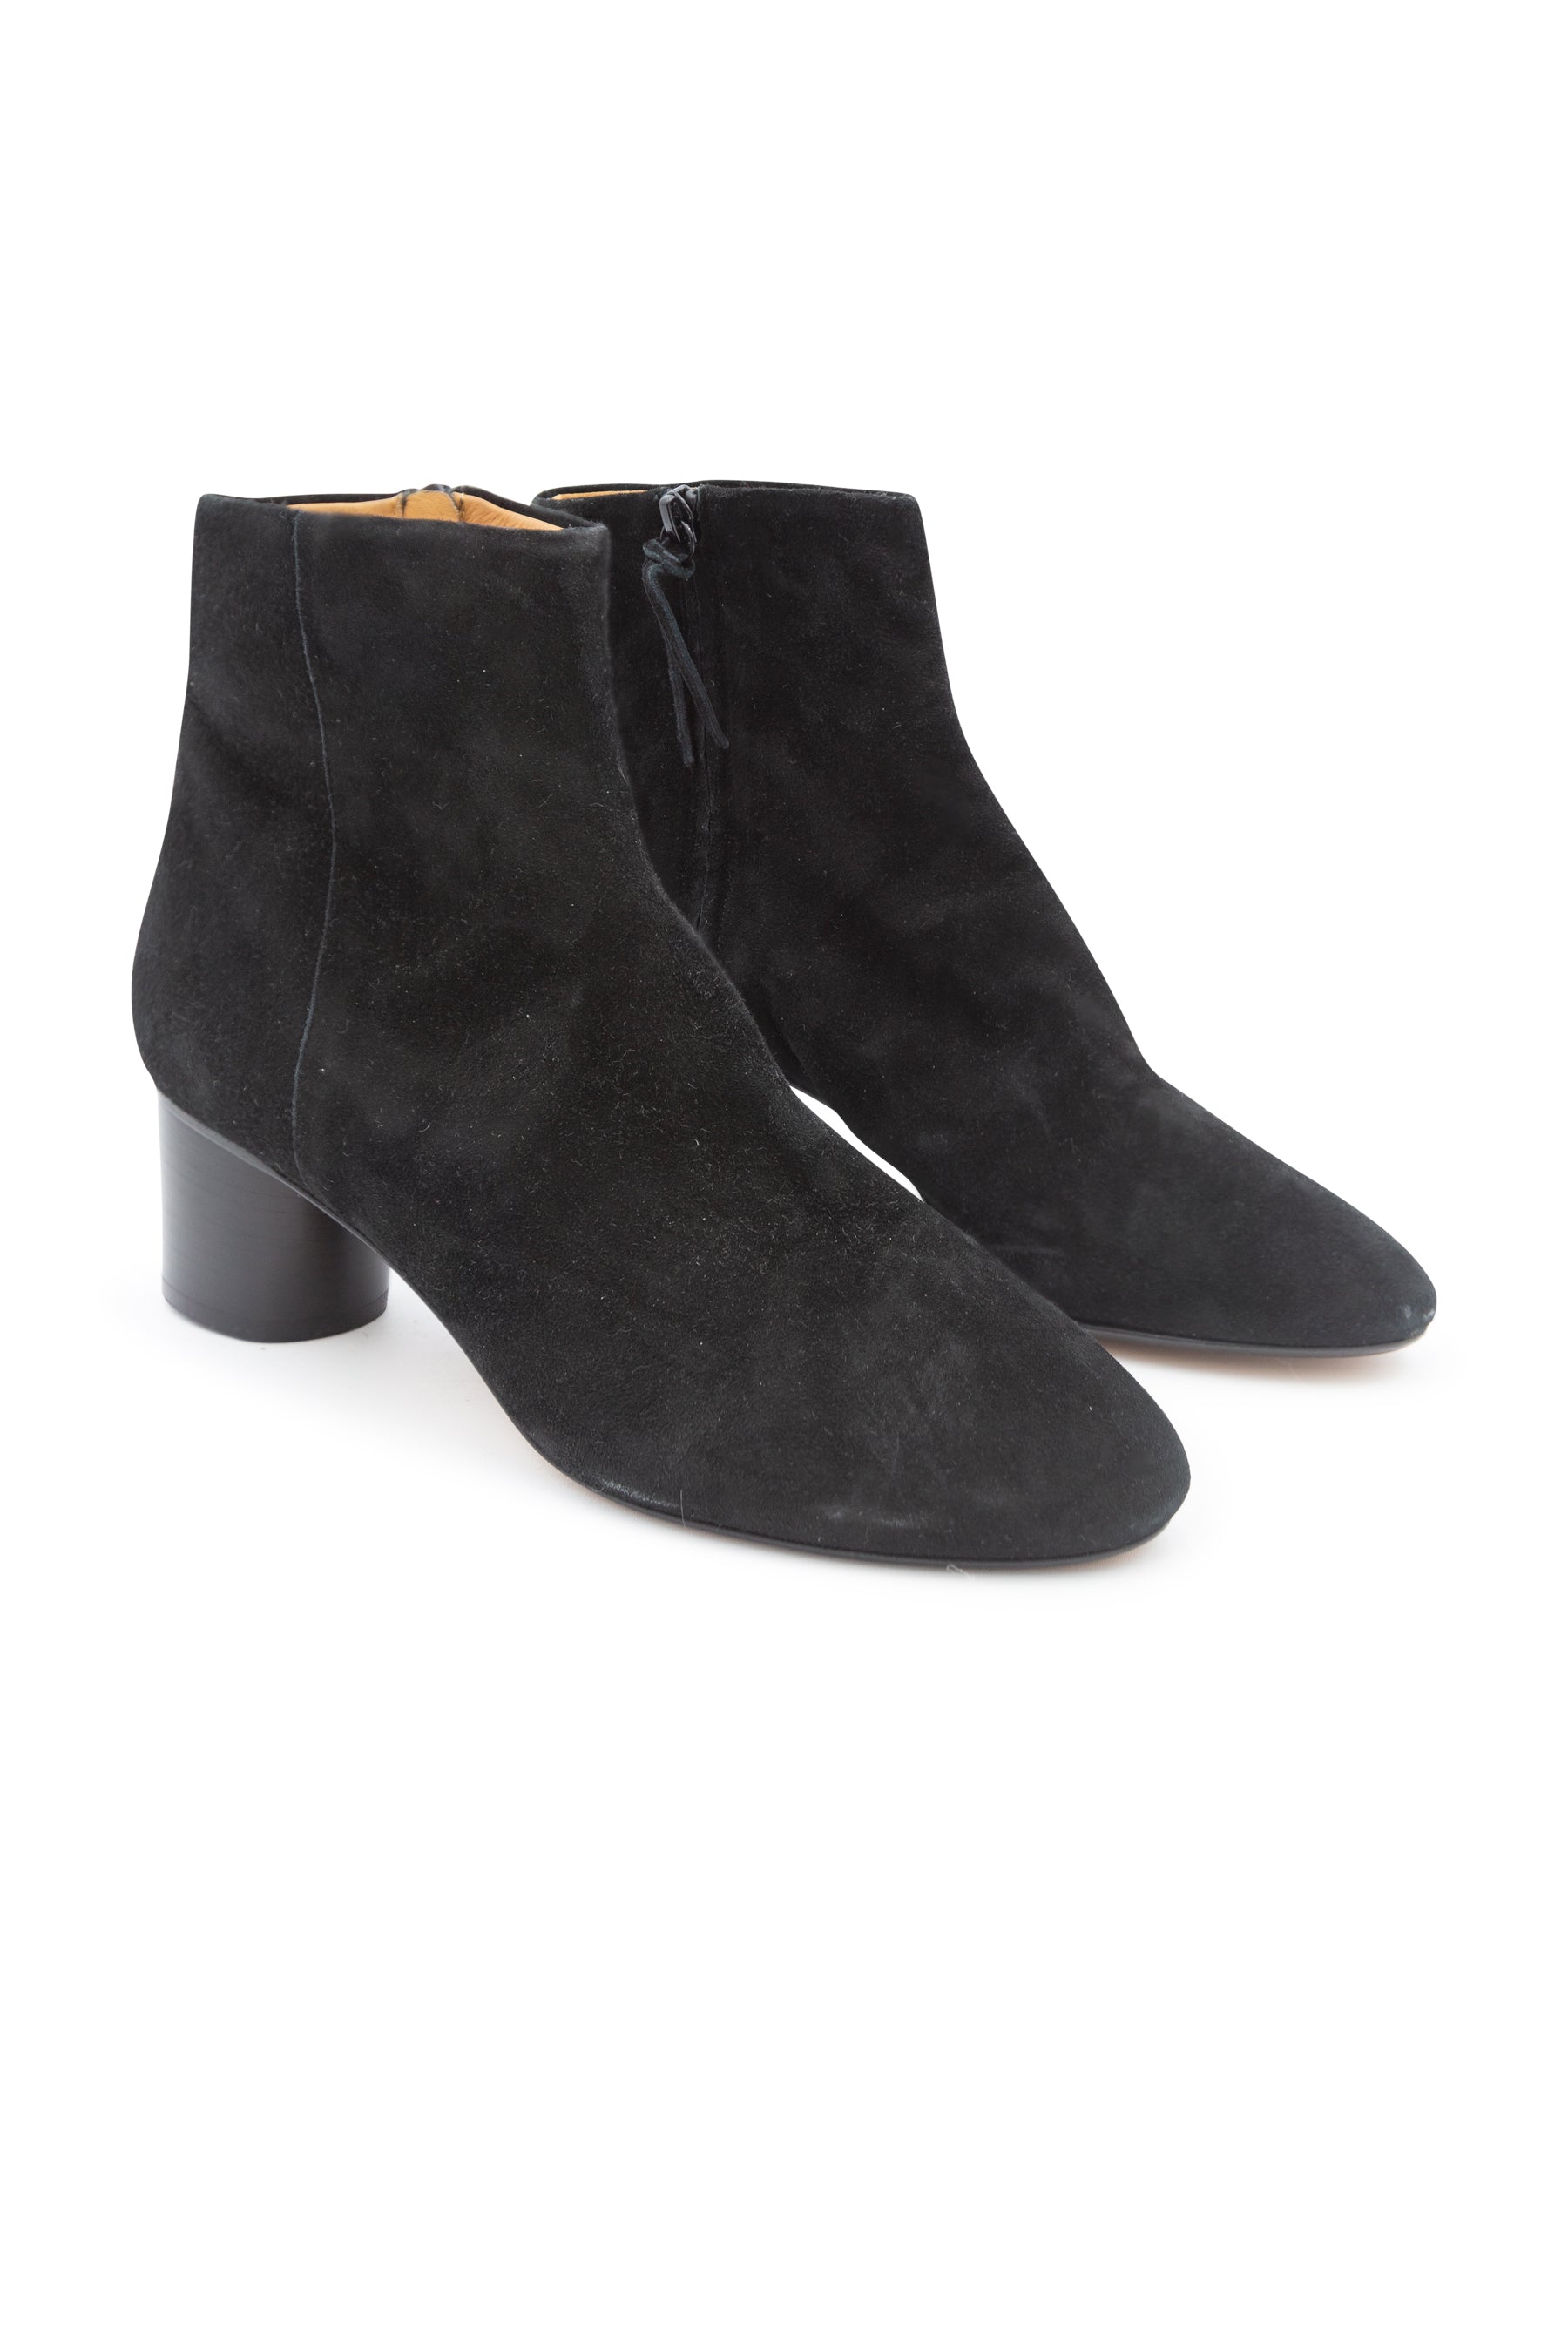 ISABEL MARANT Leather Donatee Ankle Boots